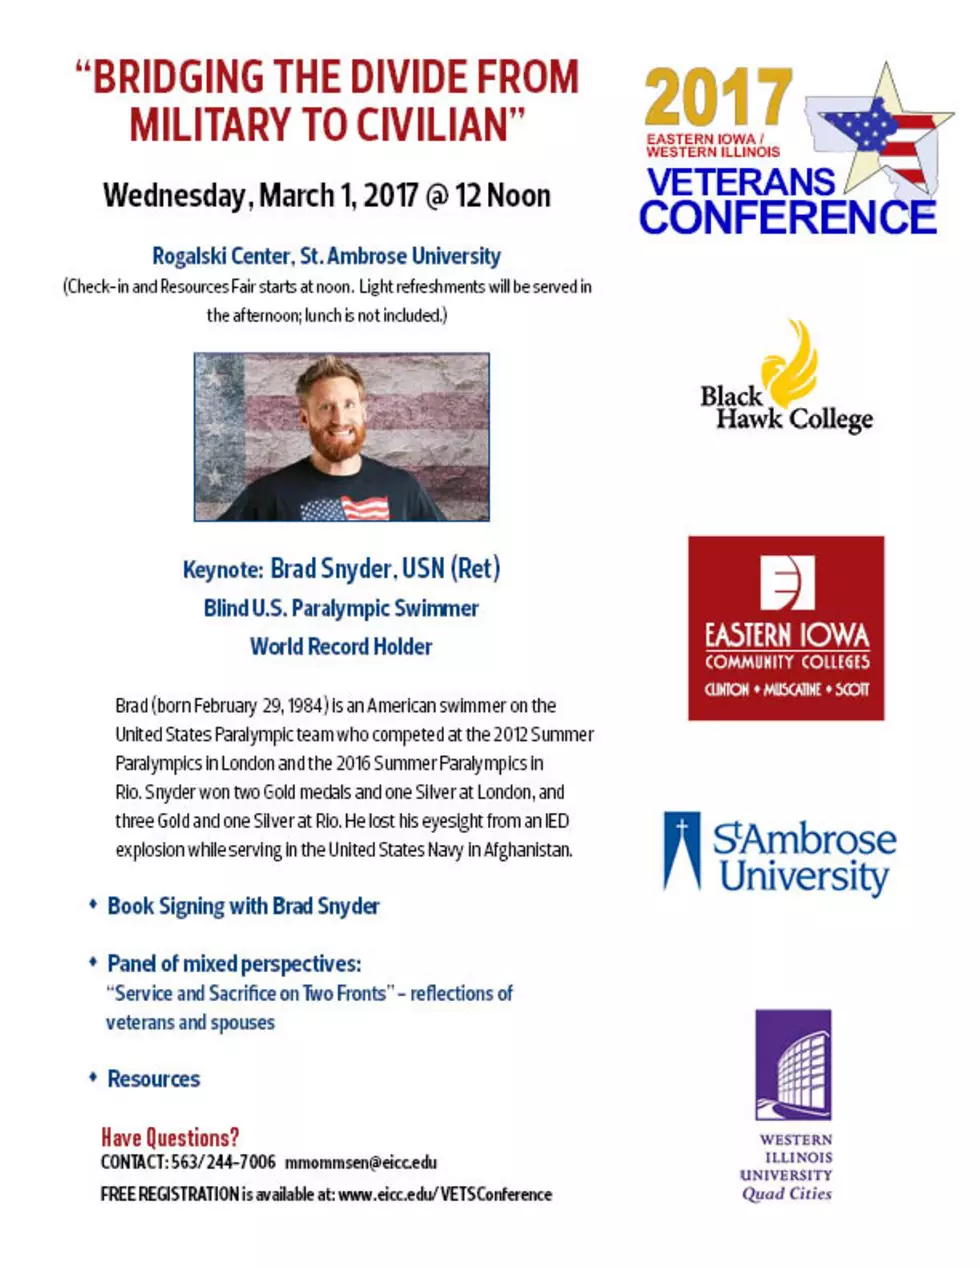 March 1st Veterans’ Conference at St. Ambrose!